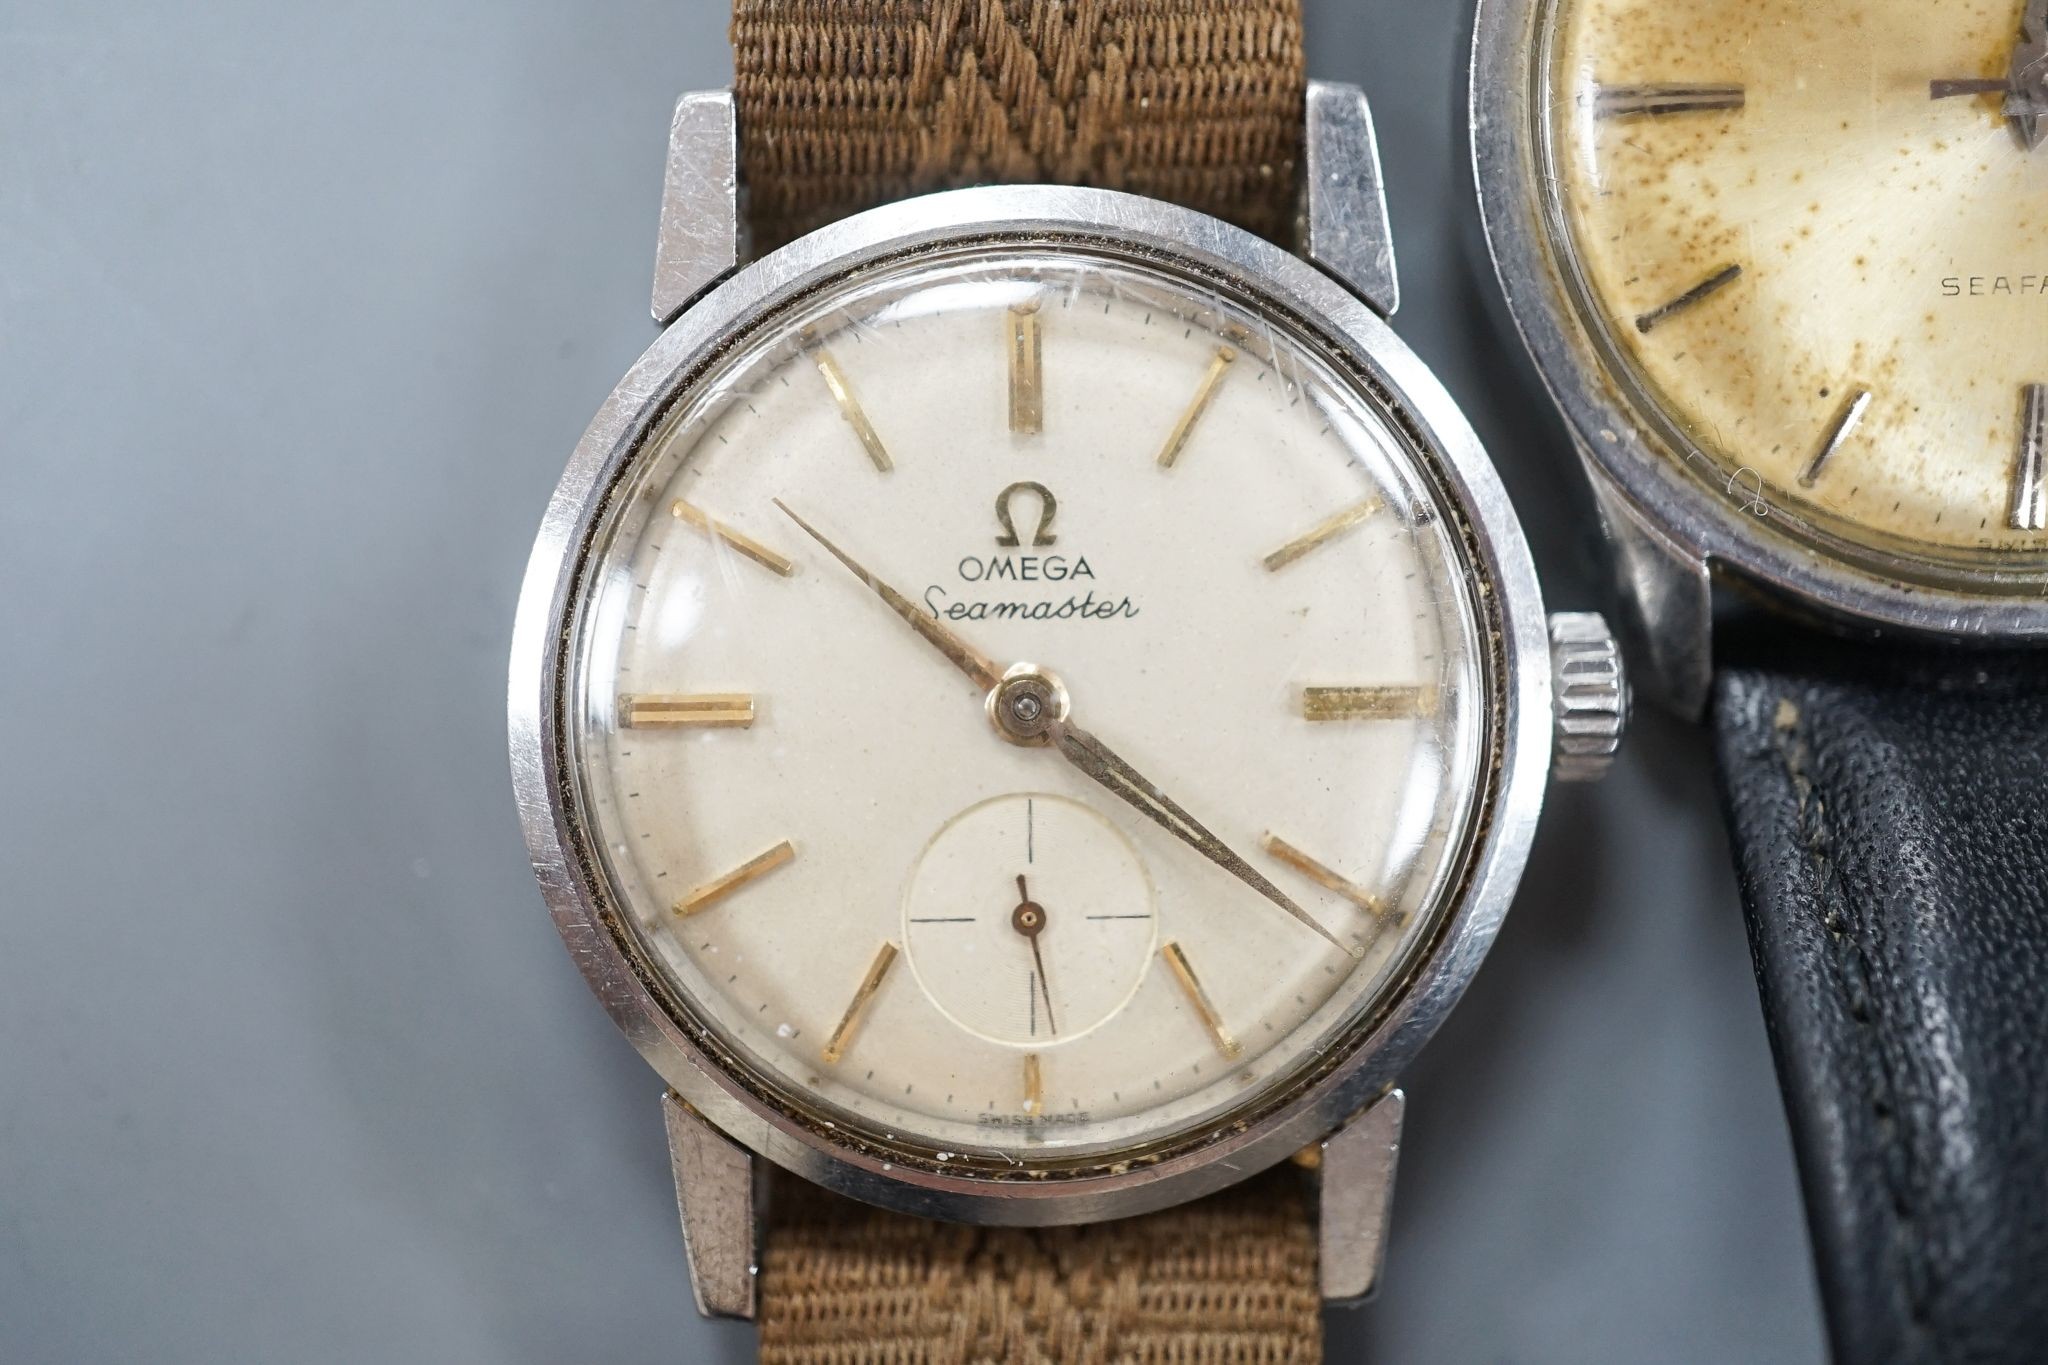 A gentleman's stainless steel Omega Seamaster manual wind wrist watch and two other watches.